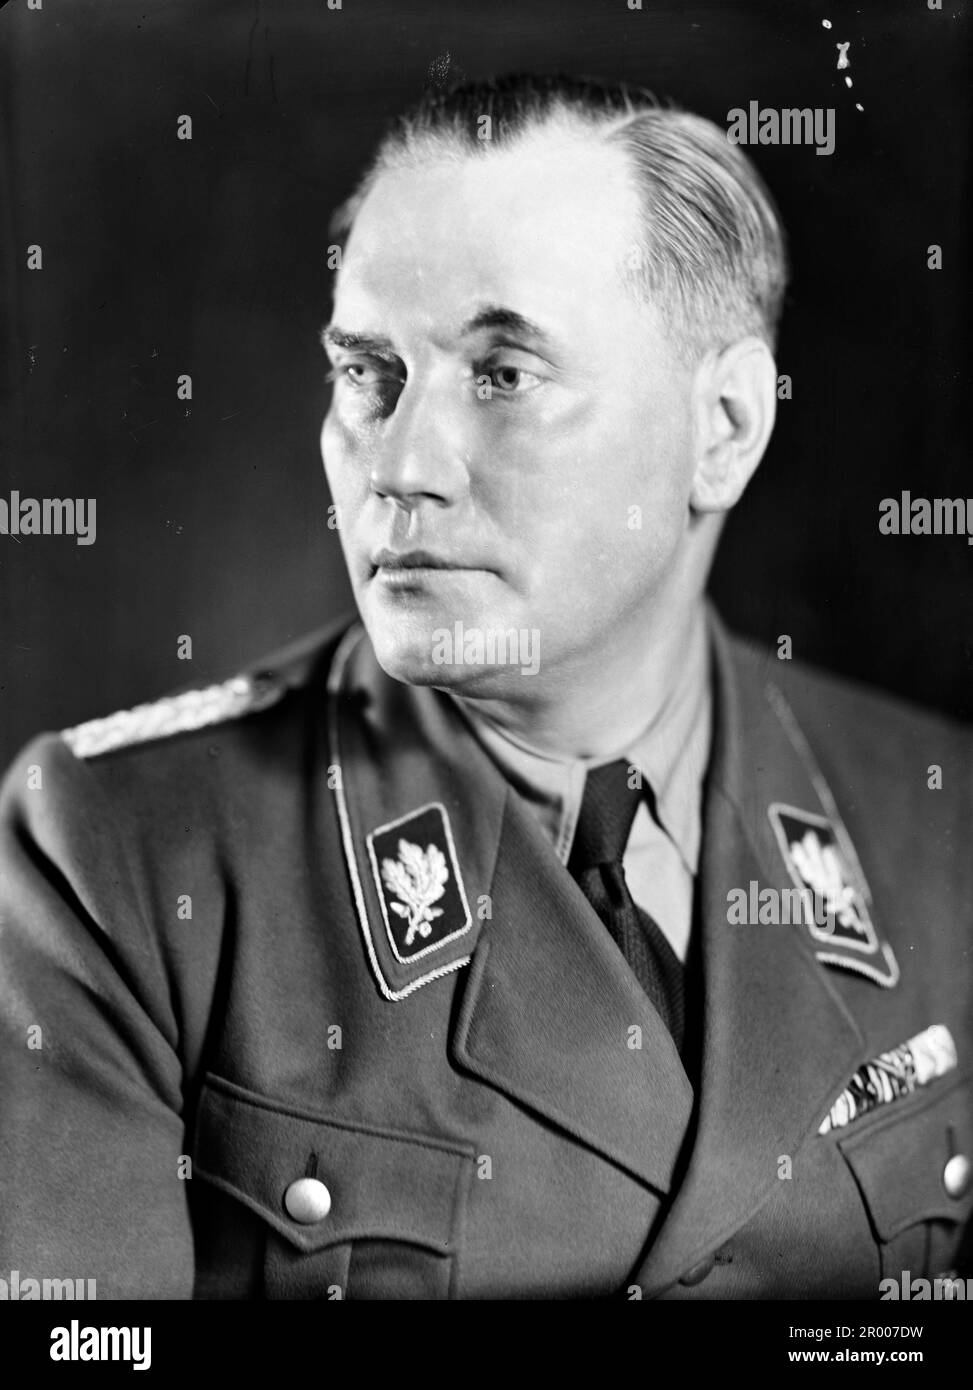 Wilhelm Brückner (11 December 1884 – 18 August 1954) was Adolf Hitler's chief adjutant until October 1940. Thereafter, Brückner joined the army, becoming an Oberst (colonel) by the end of World War II. In late 1922 he joined the Nazi Party . On 9 November 1923 Brückner took part in the Beer Hall Putsch in Munich, and was found guilty of aiding and abetting high treason. Brückner was appointed Chief Adjutant to Hitler on 20 February 1934, and retained that role until being dismissed on 18 October 1940. Here he is wearing his SA (Sturmabteilung) uniform in 1933–1934; Stock Photo